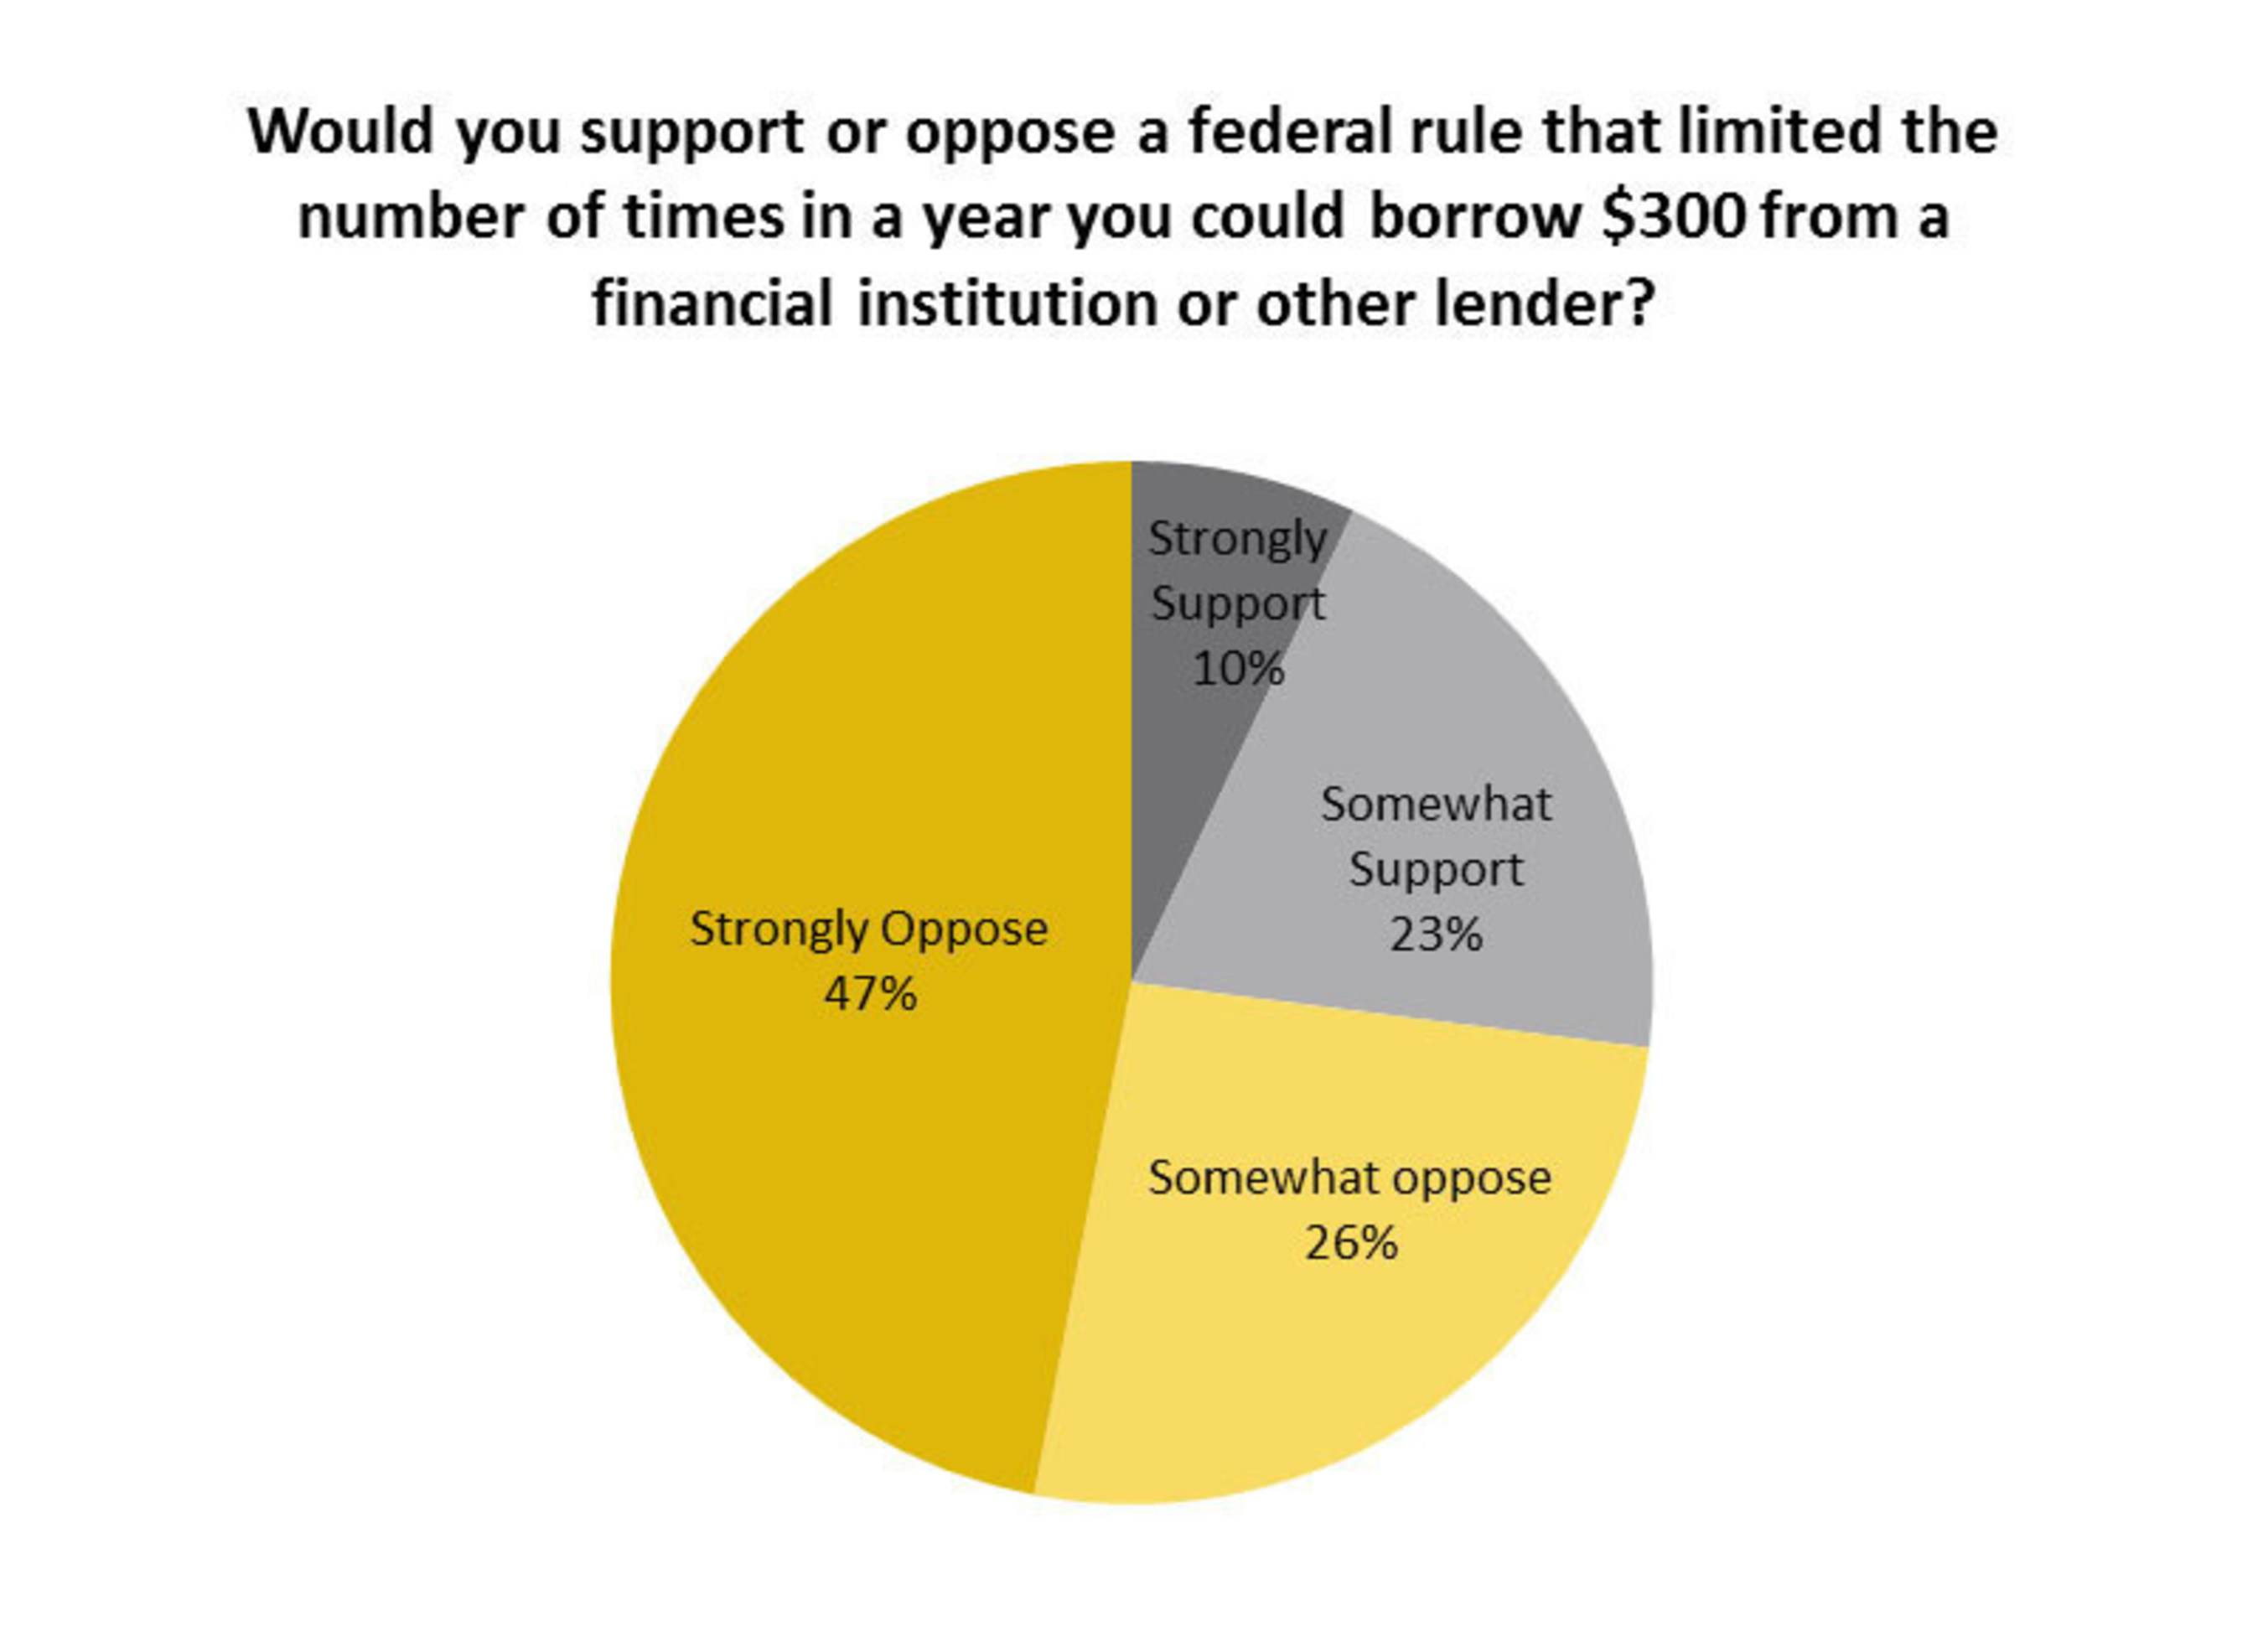 Would you support or oppose a federal rule that limited the number of times in a year you could borrow $300 from a financial institution or other lender?